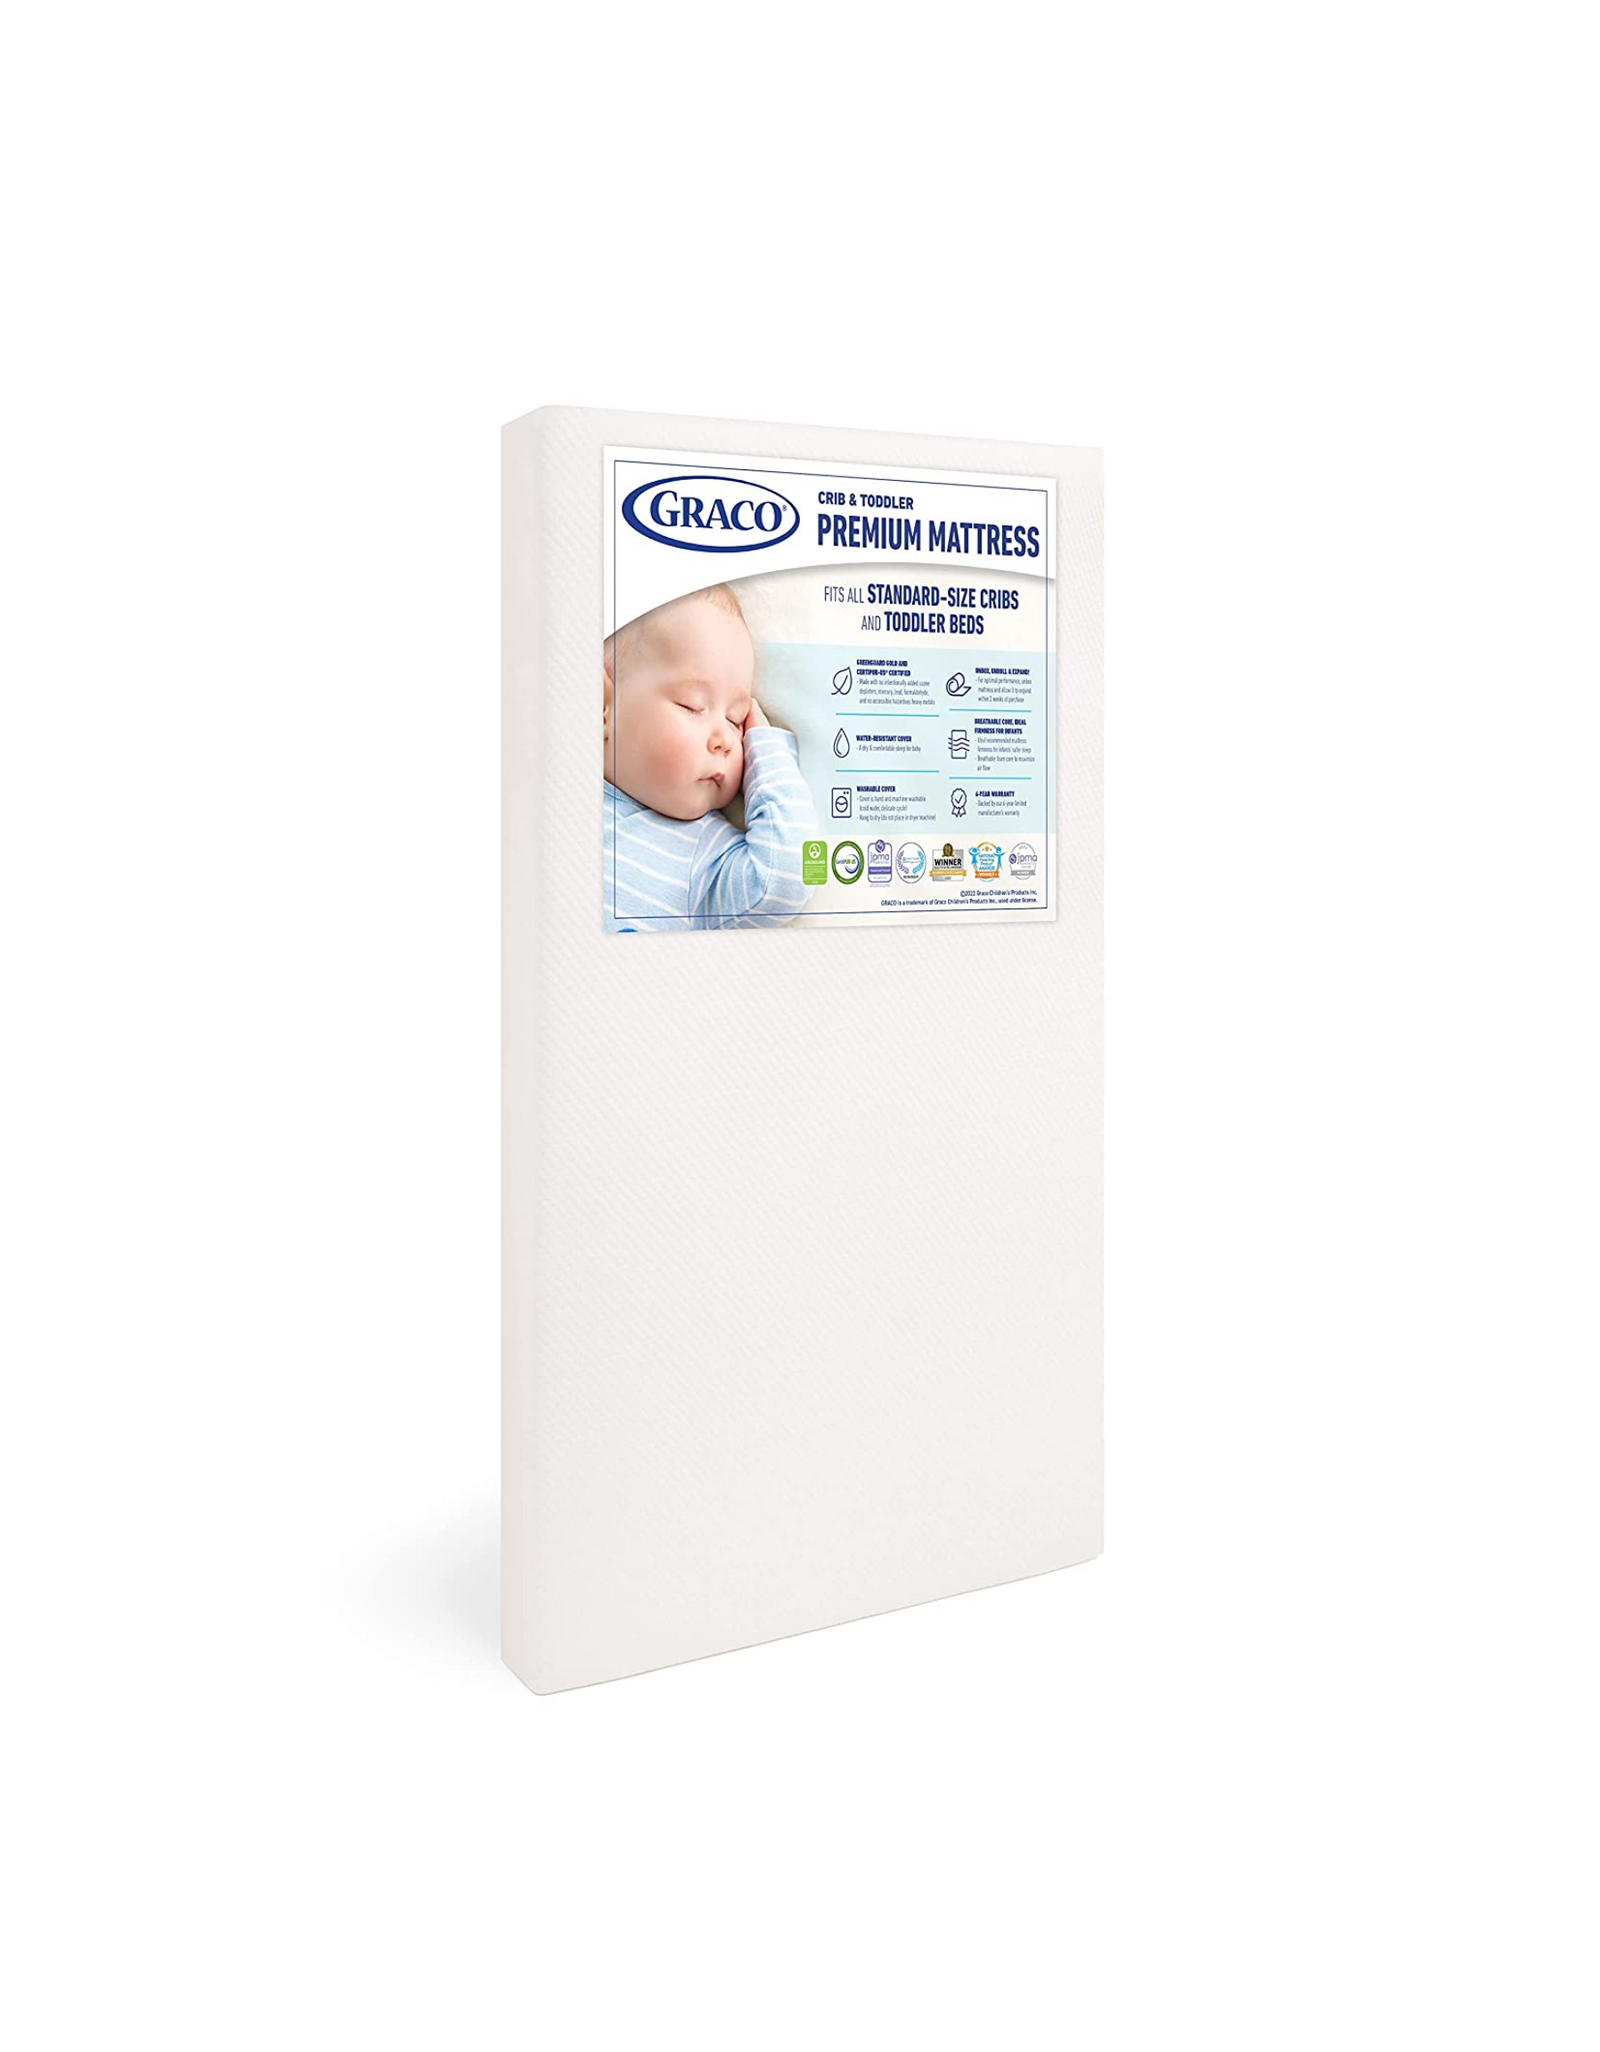 Graco Premium Foam Crib & Toddler Mattress, Fits All Standard-Size Cribs and Toddler Beds